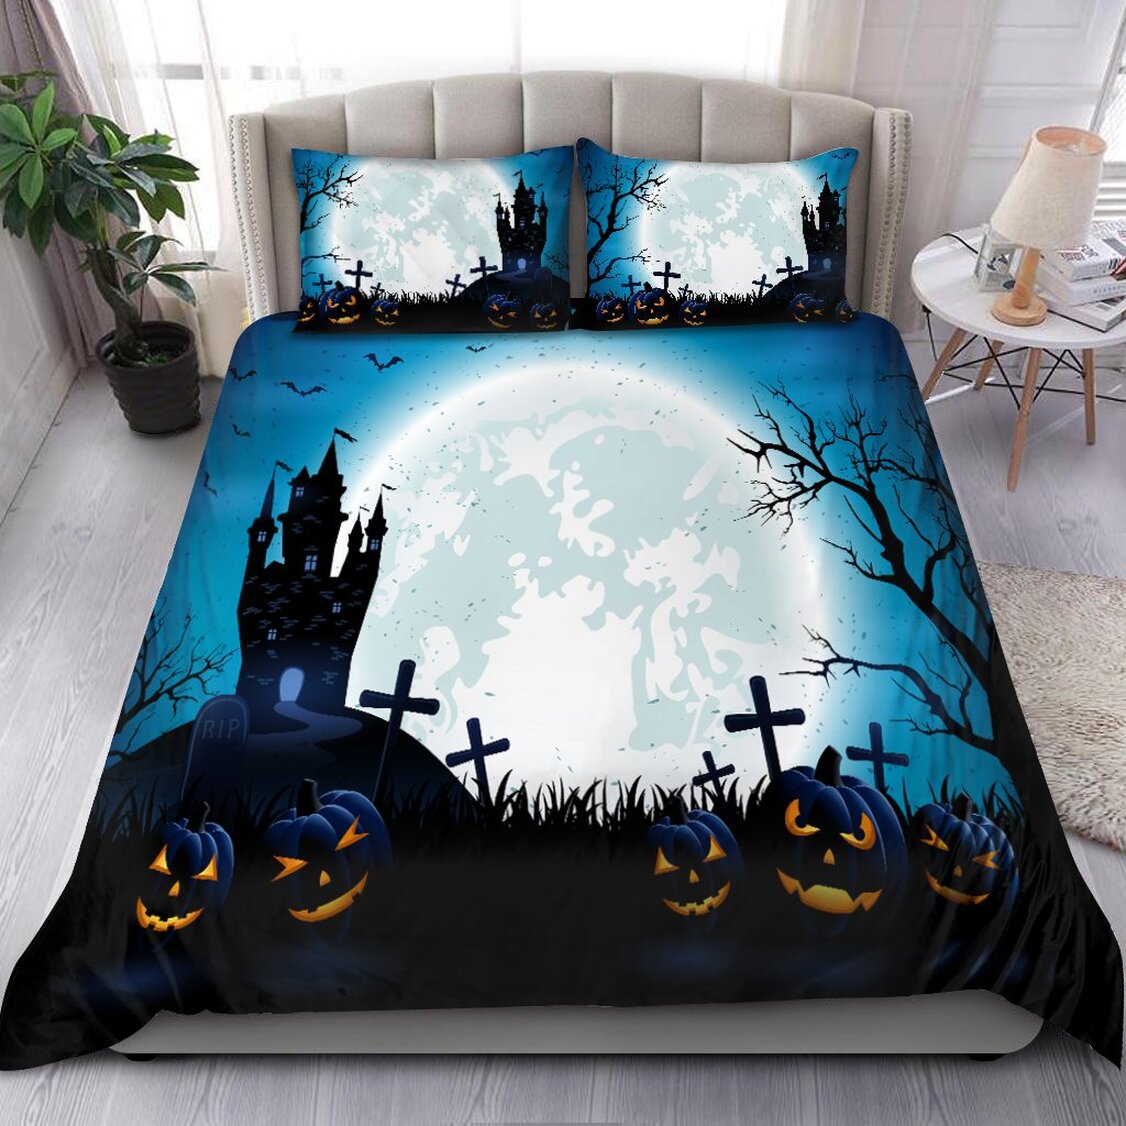 Halloween Night Quilt Bedding Set - Castle And Pumpkin Quilt Bedroom Decor With 2 Pillowcases